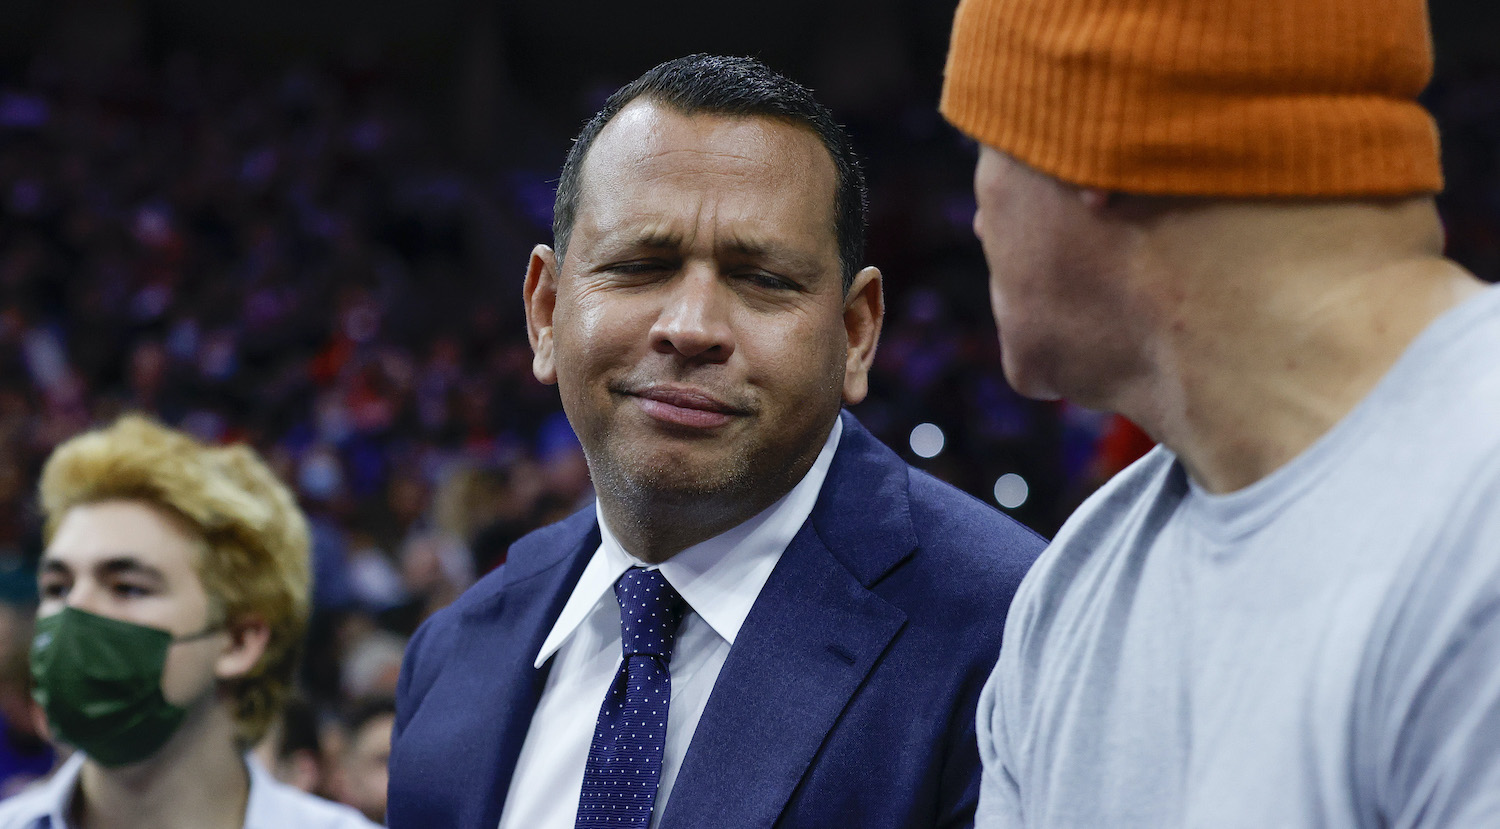 PHILADELPHIA, PENNSYLVANIA - DECEMBER 11: Former Major League Baseball player Alex Rodriguez looks on during a game between the Philadelphia 76ers and Golden State Warriors at Wells Fargo Center on December 11, 2021 in Philadelphia, Pennsylvania. NOTE TO USER: User expressly acknowledges and agrees that, by downloading and or using this photograph, User is consenting to the terms and conditions of the Getty Images License Agreement. (Photo by Tim Nwachukwu/Getty Images)